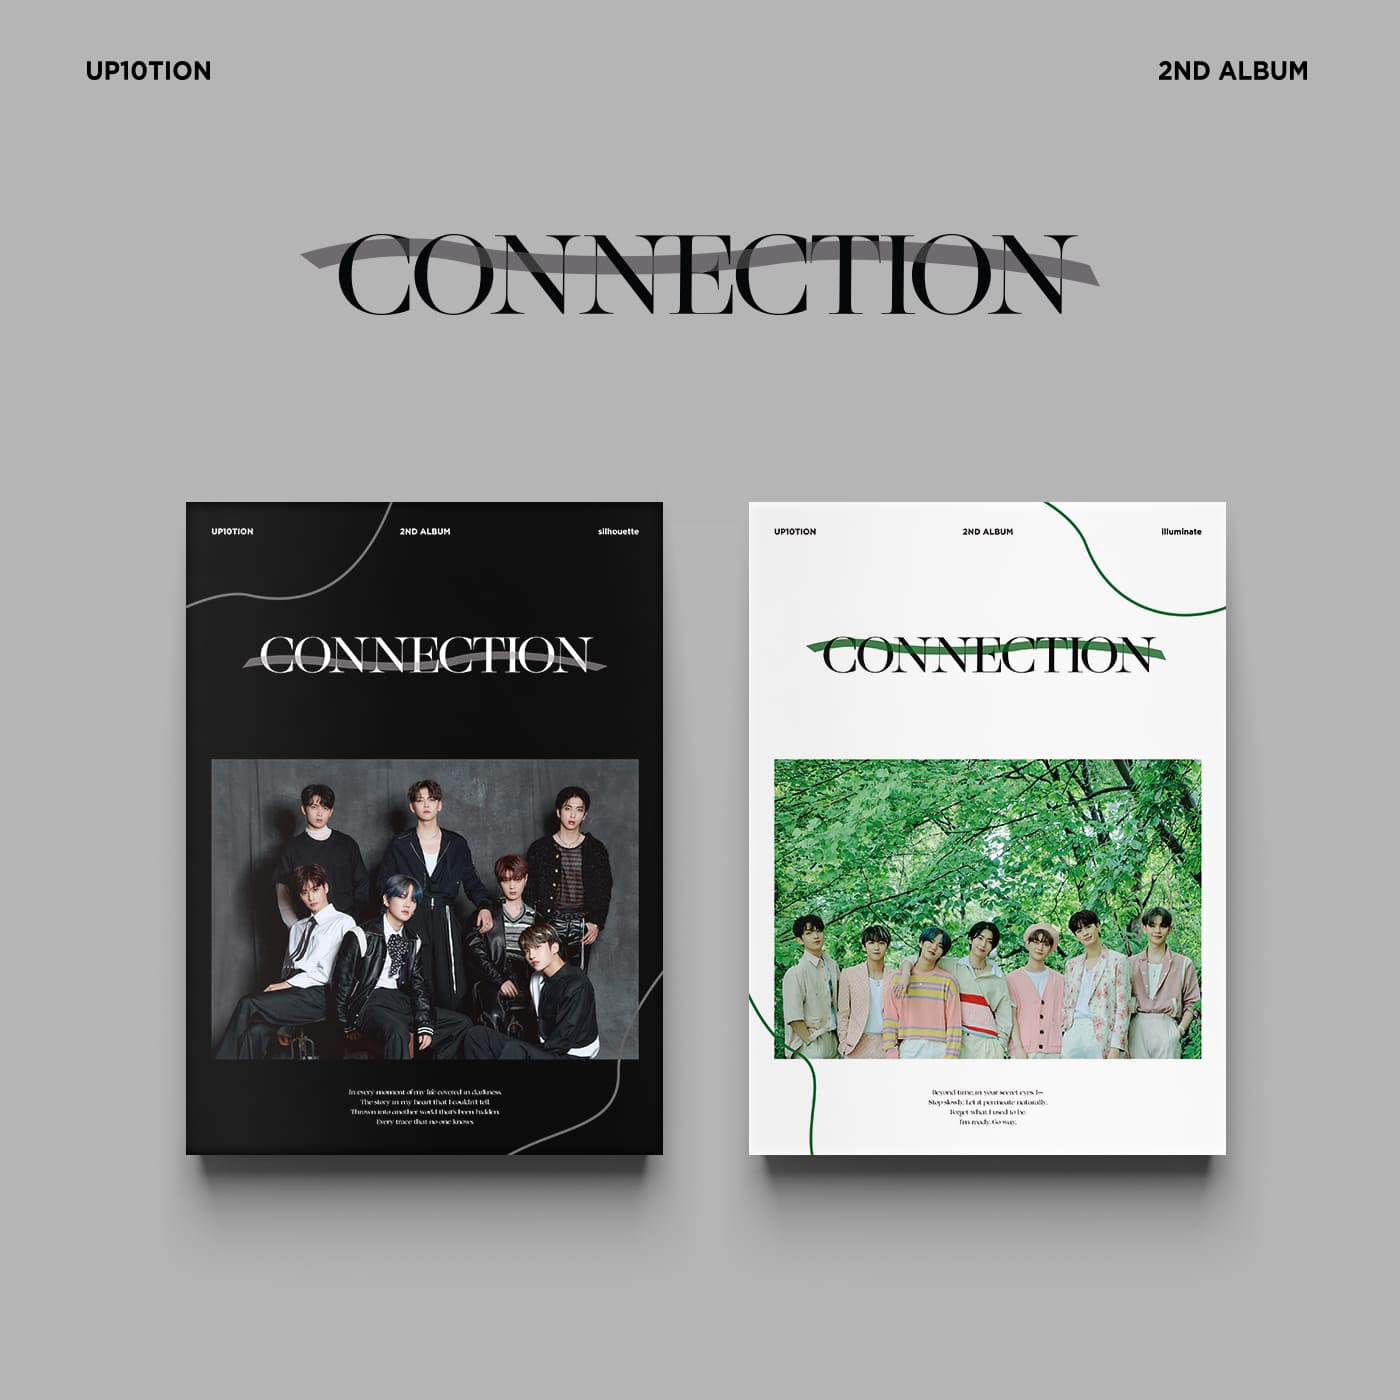 UP10TION 2nd Album [CONNECTION] (Random ver.) 🇰🇷